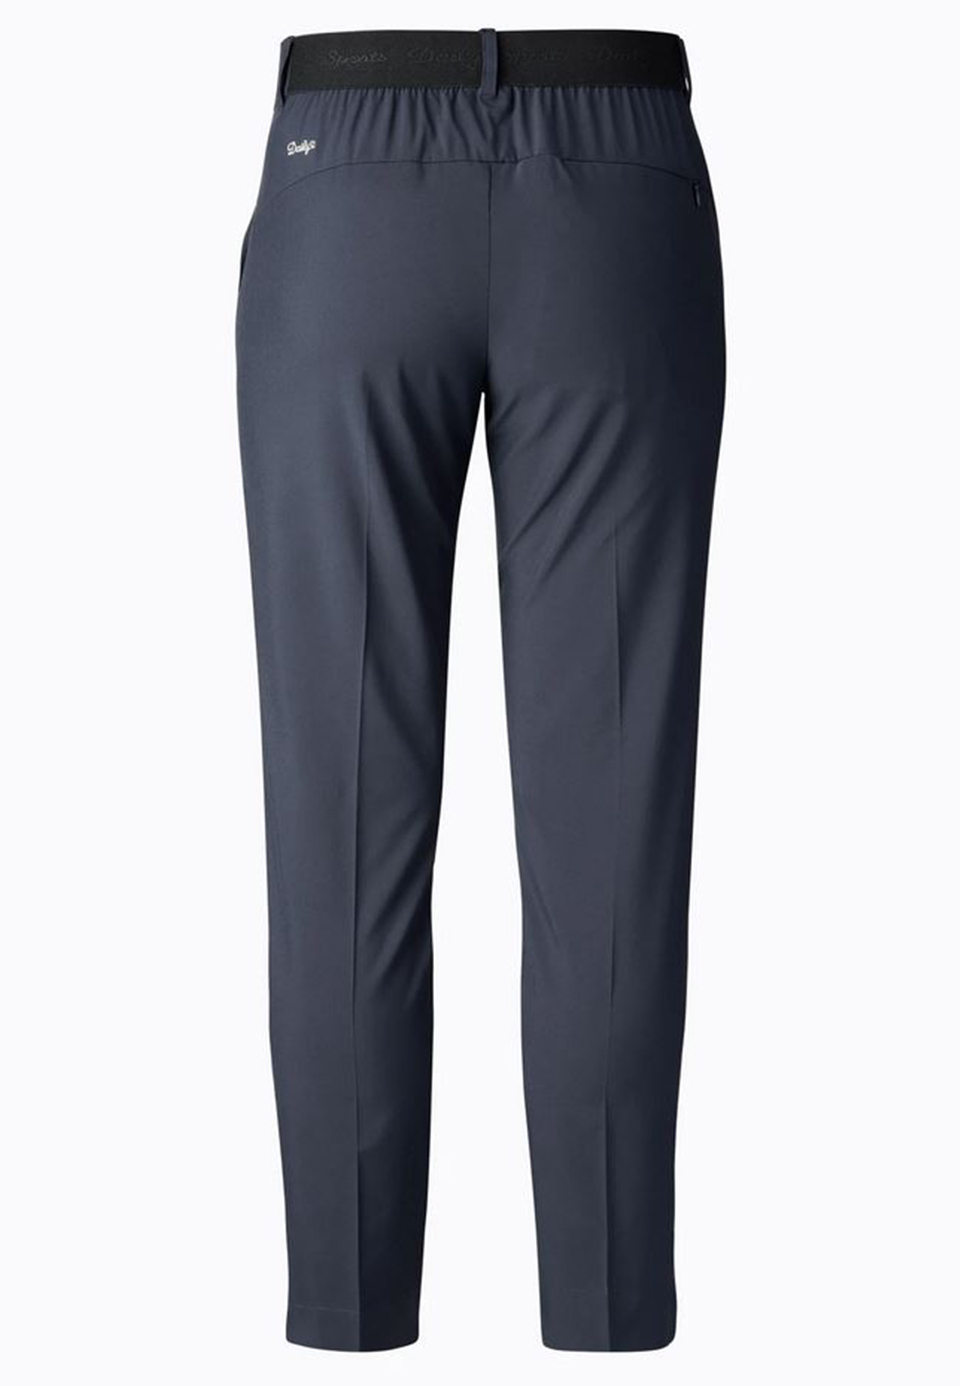 DAILY SPORTS Damen BEYOND ANKLE Golfhose 1000044 navy